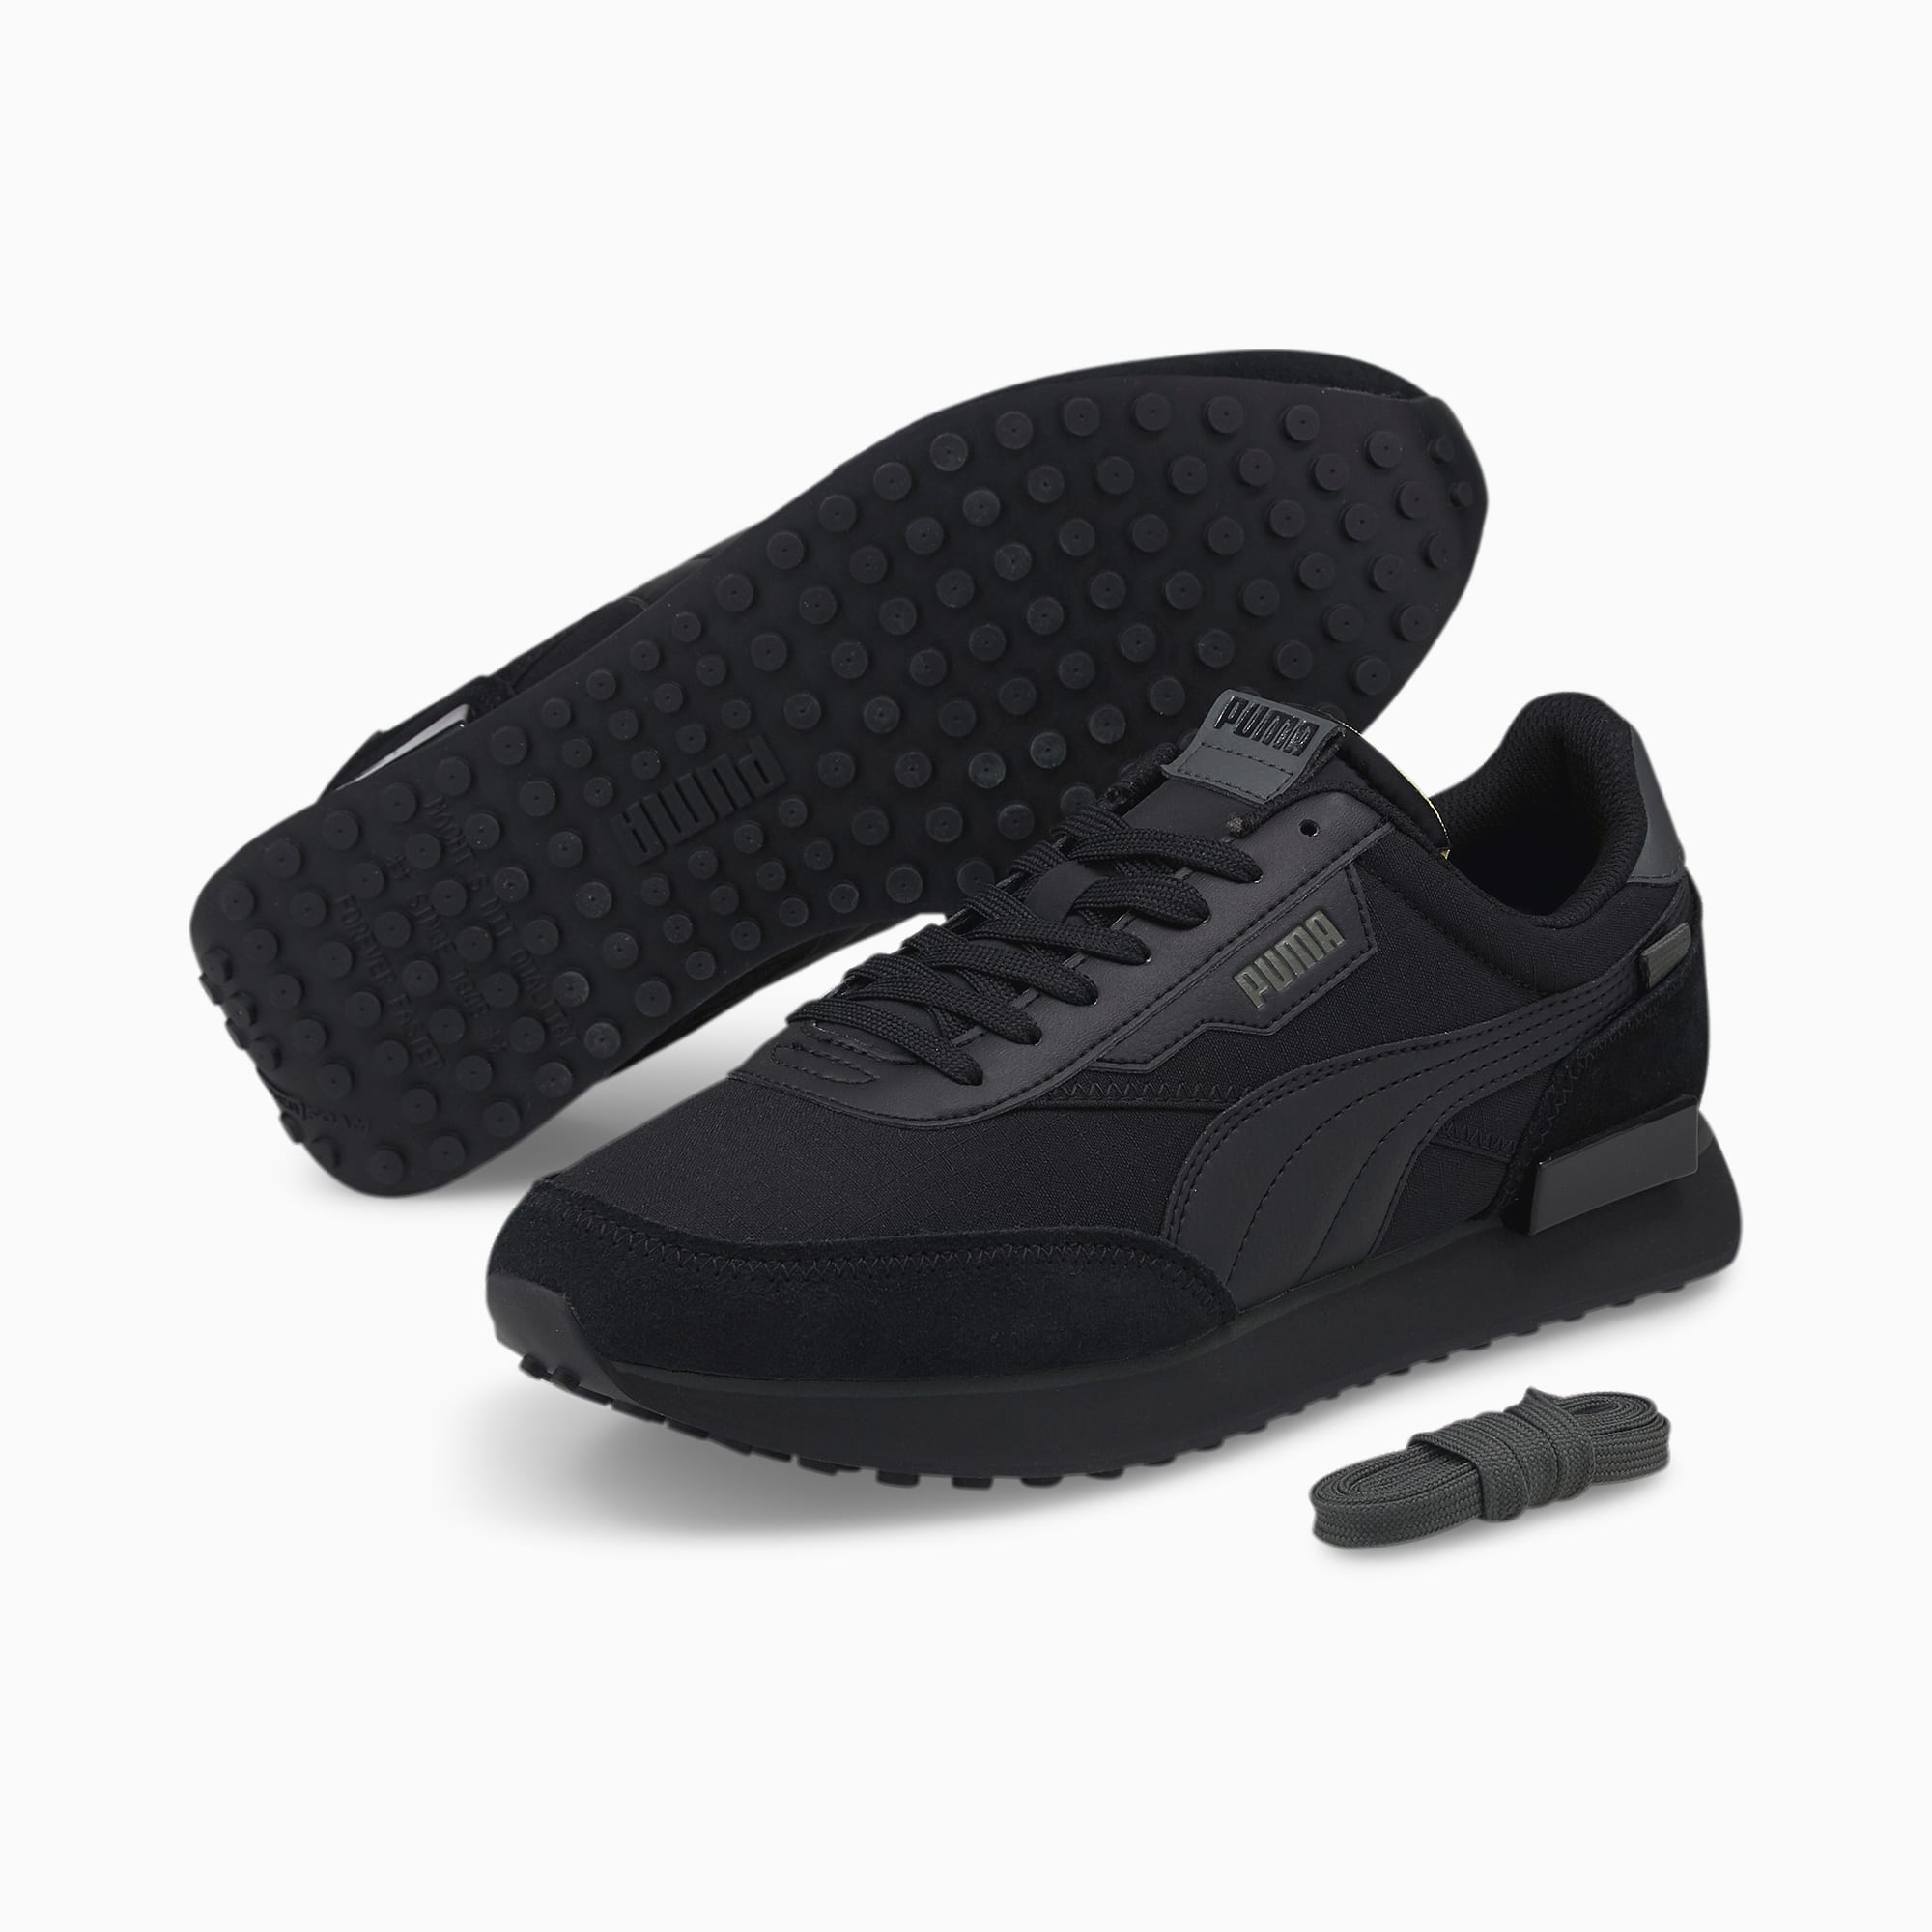 PUMA Chaussure Sneakers Rider Play On Pour Homme, Noir